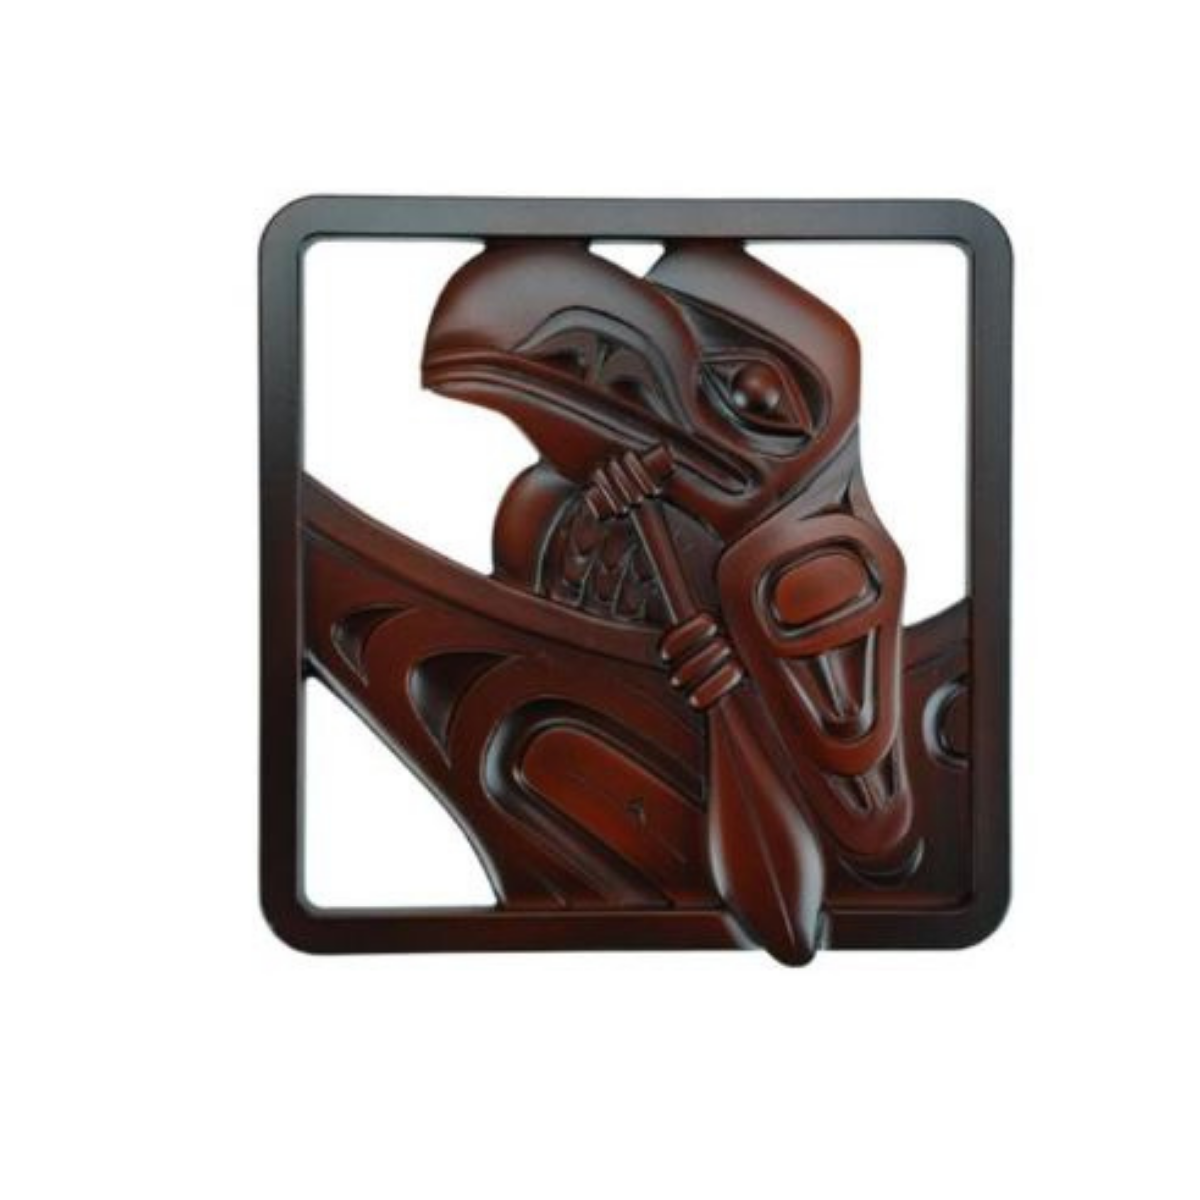 Trivet / Wall Decor - Raven Traveling by Andrew Williams (Rosewood)